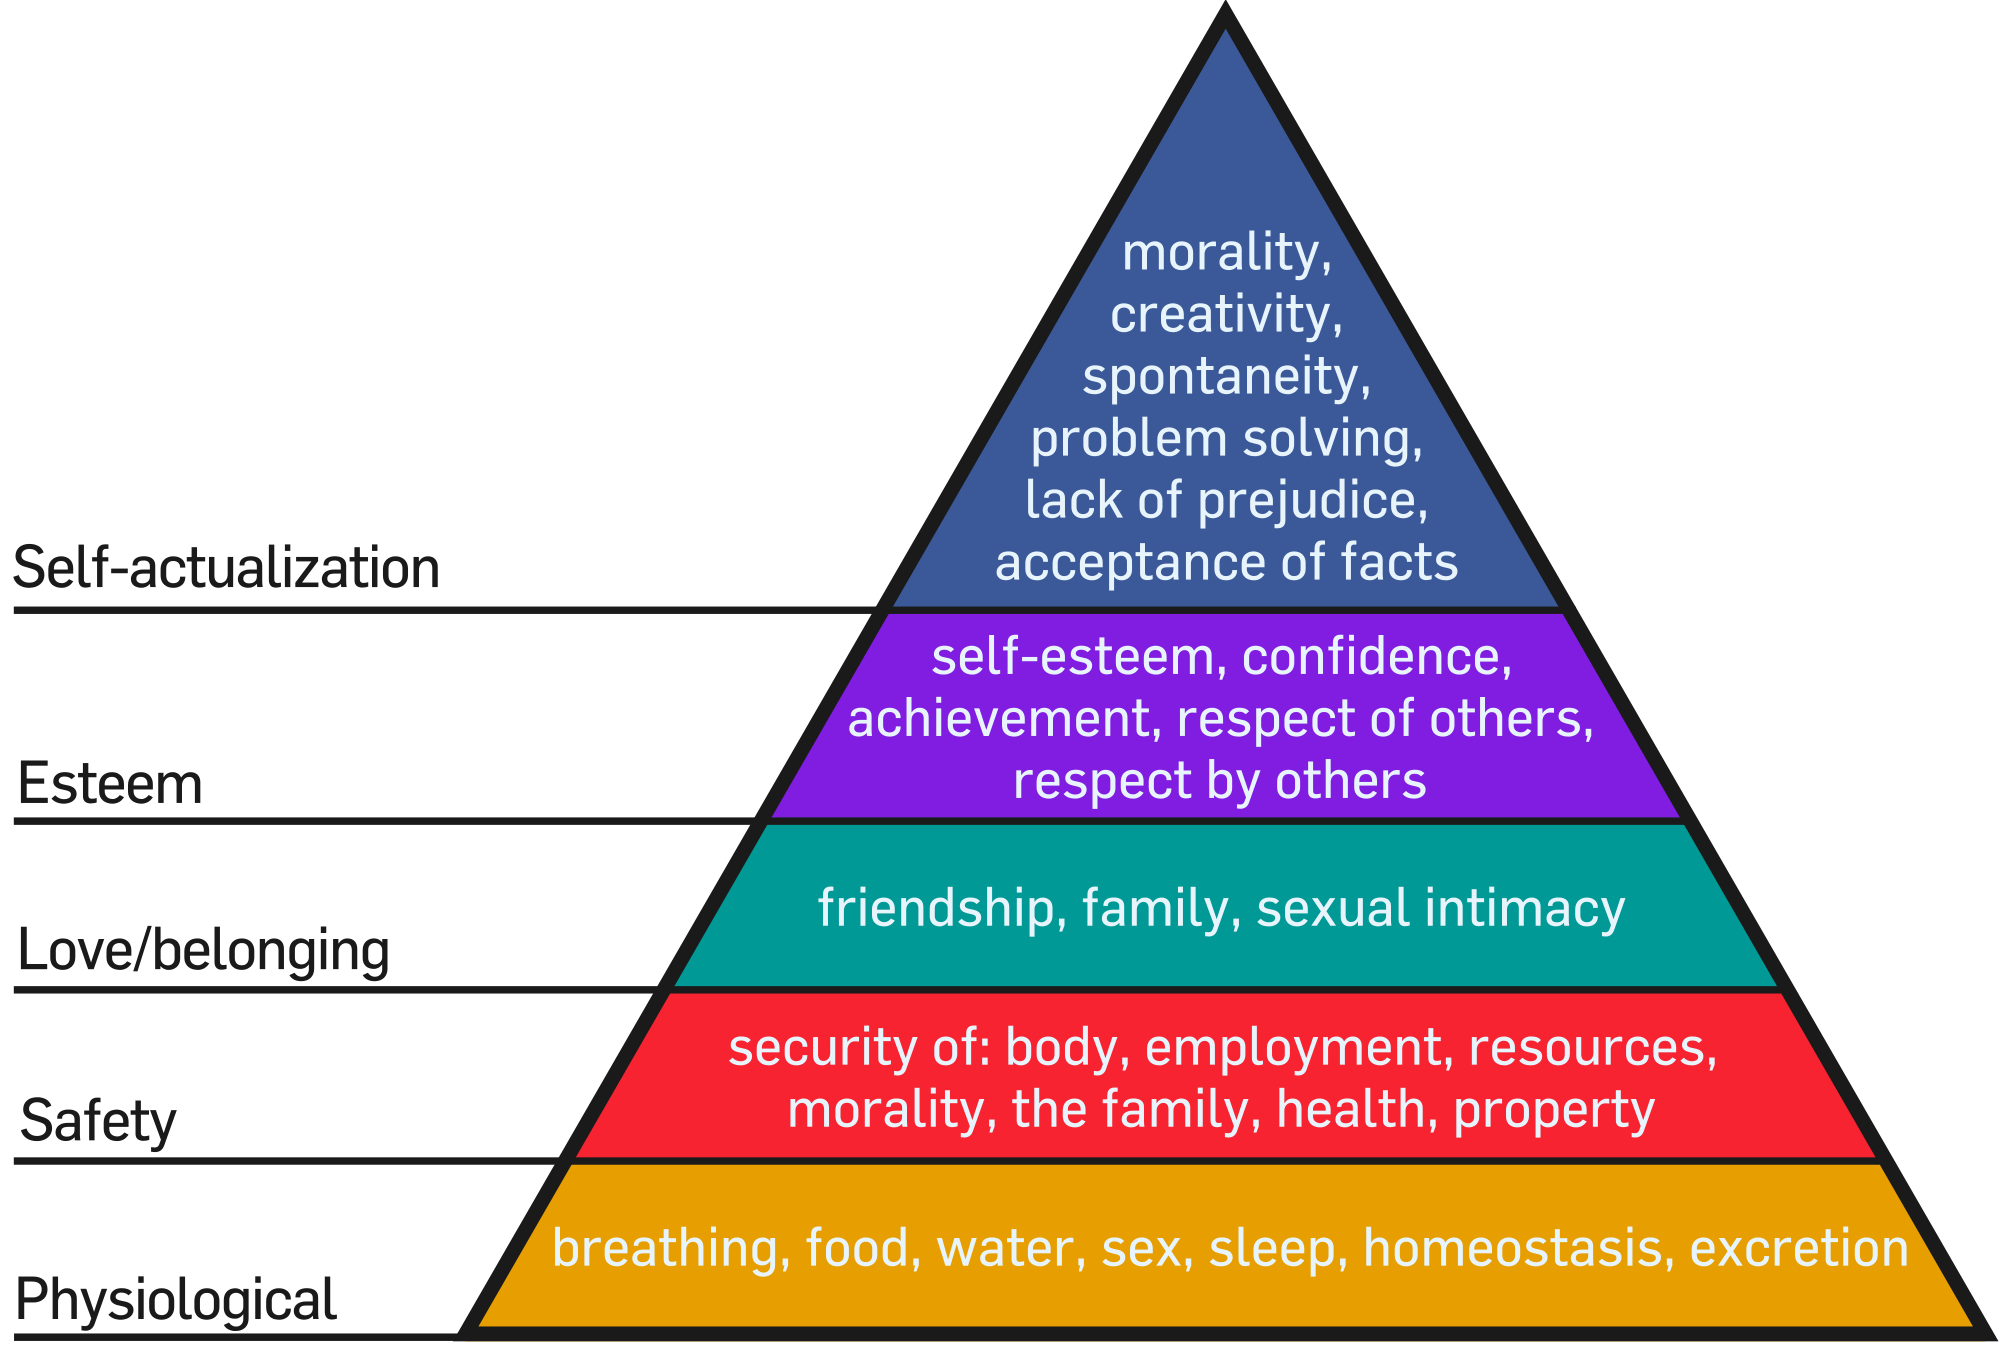 Maslow's hierarchy of needs. Image description available.